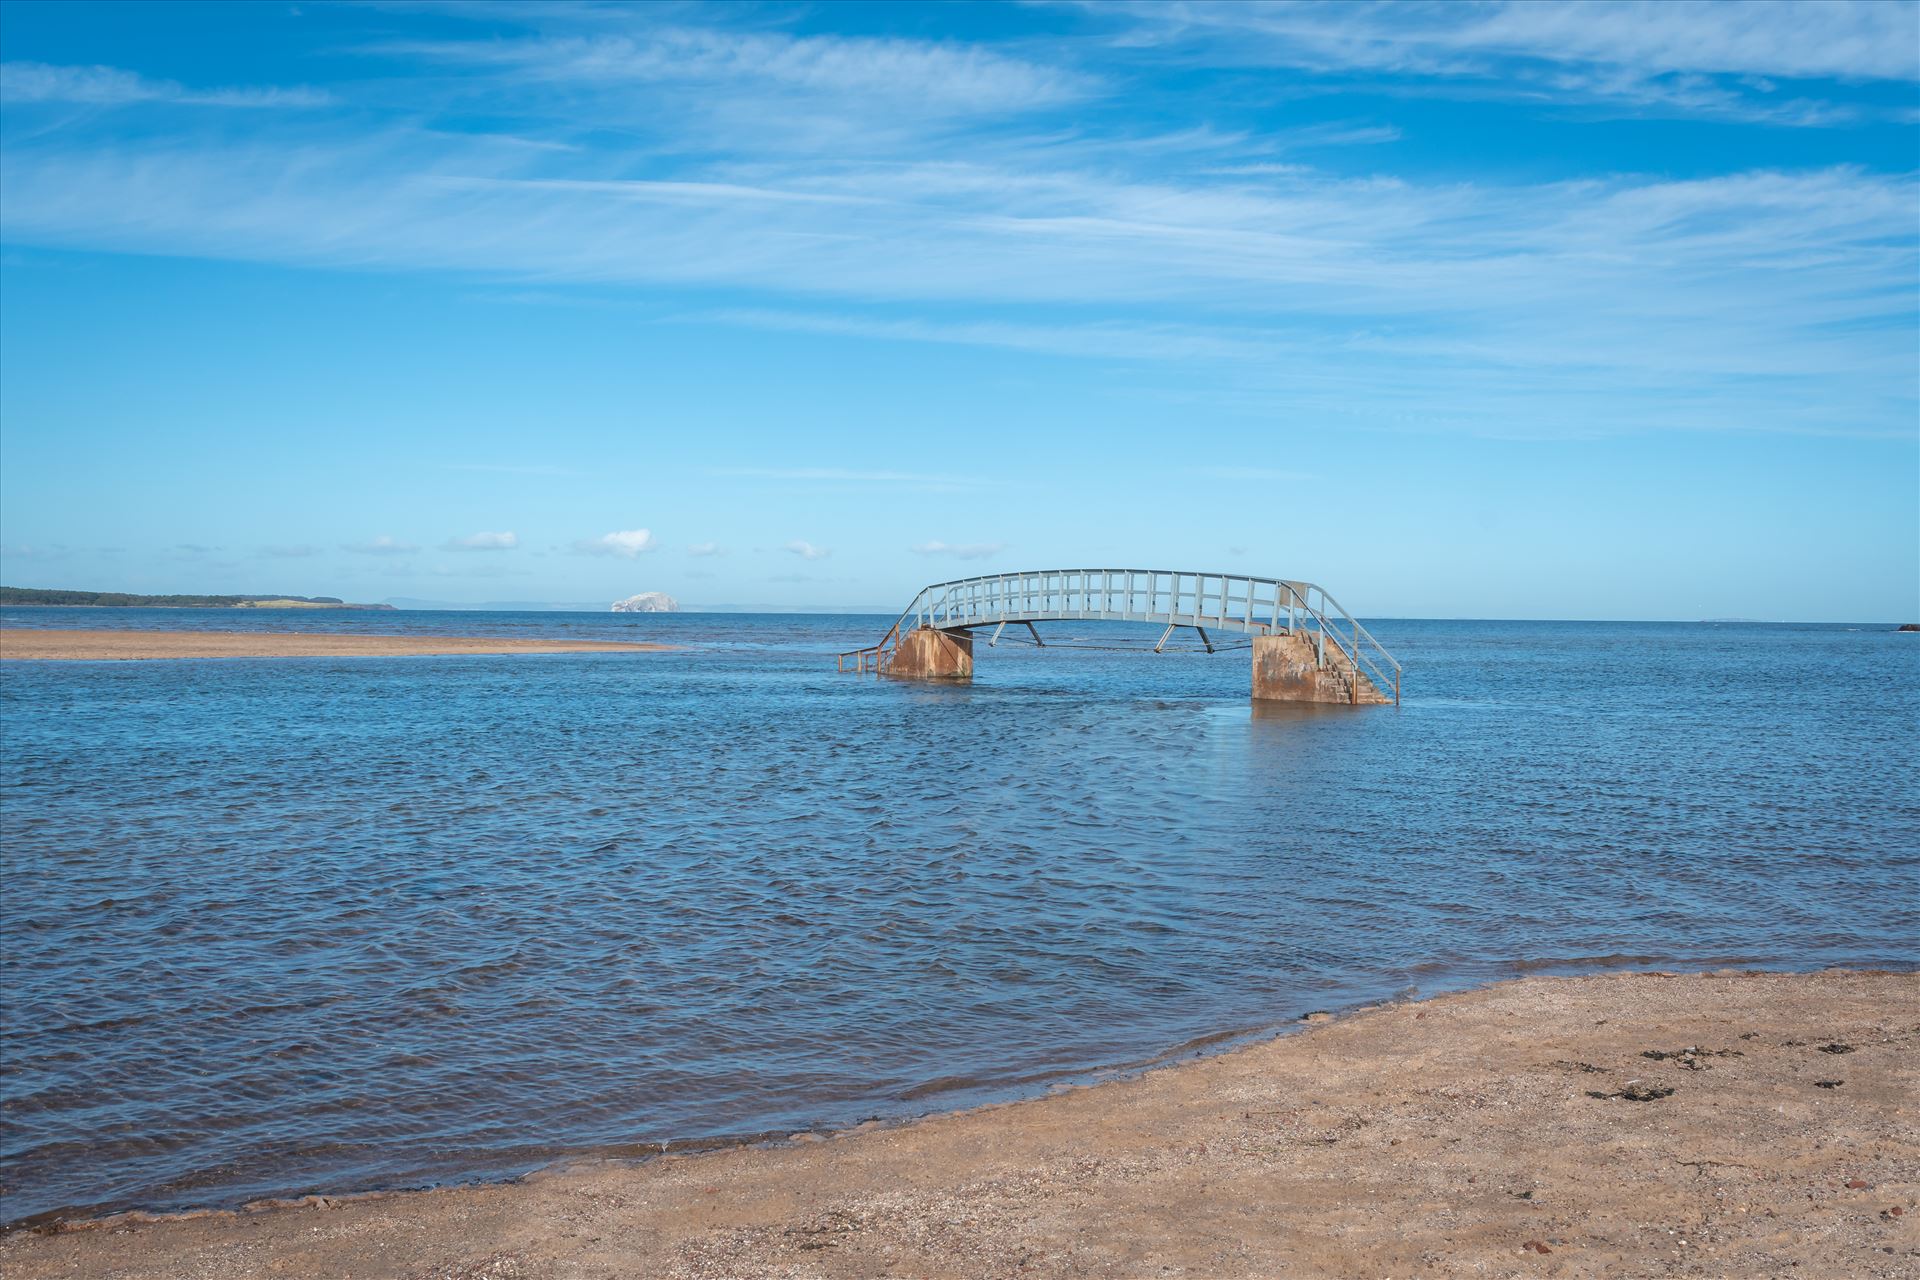 'Bridge to Nowhere’, Dunbar, Scotland When the tide comes surging into shore, what should be an easy path to the beach becomes suddenly impassable. At high tide, the water swallows the land around the bridge, making it look as though it’s stranded in the middle of a sea. by Graham Dobson Photography